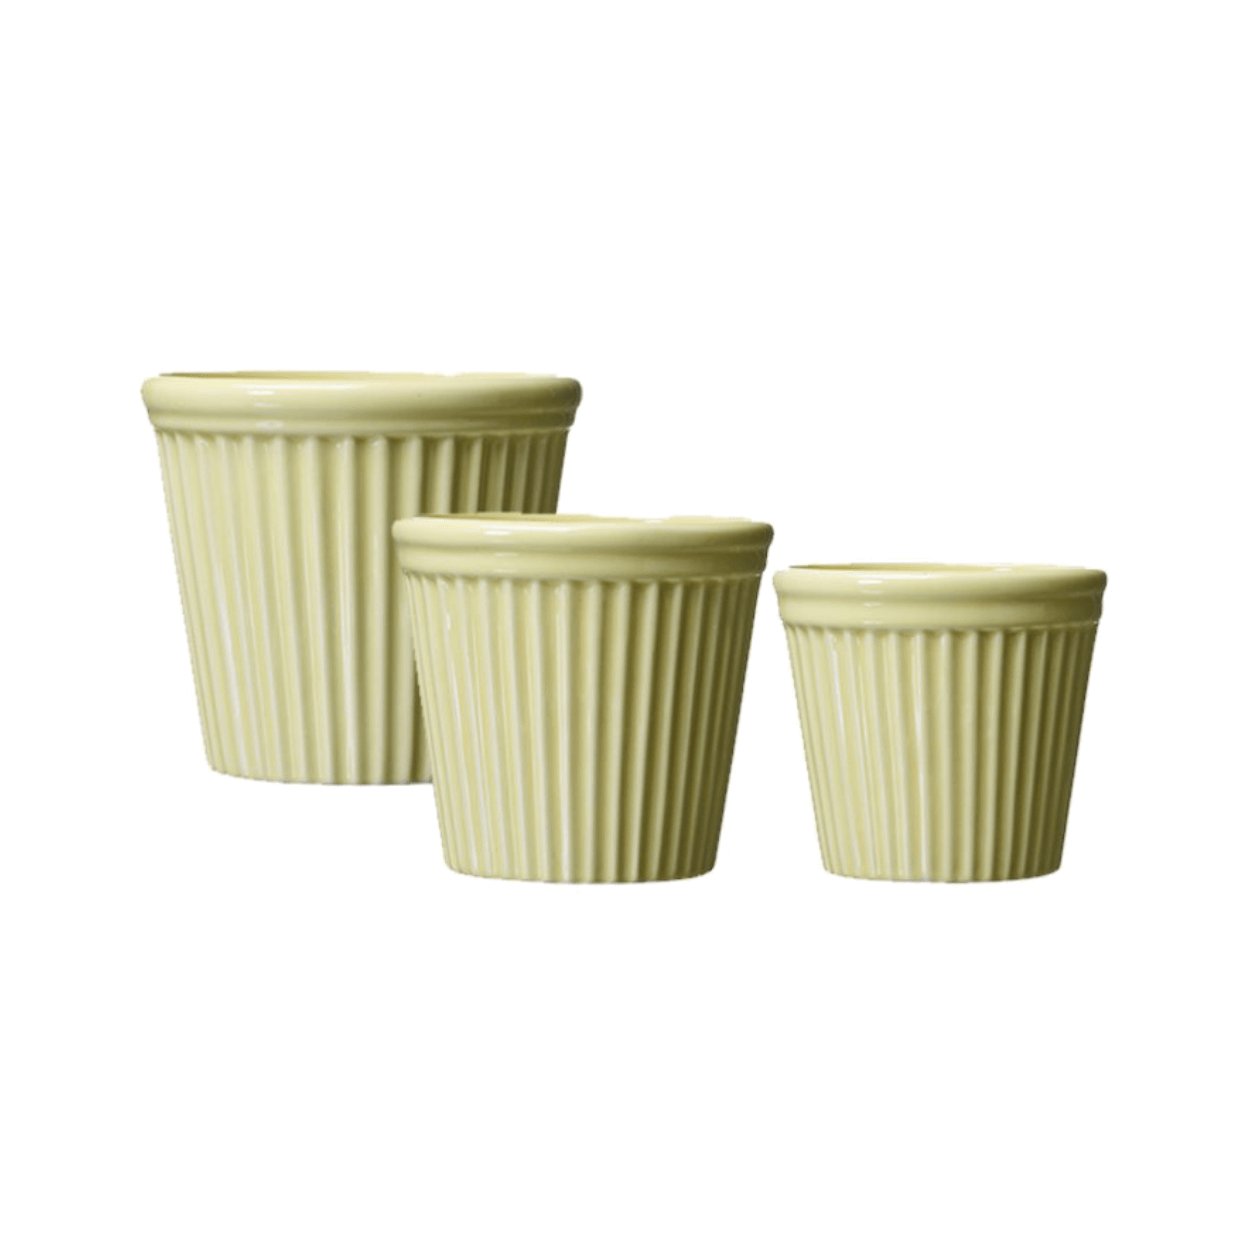 set of 3 estrid plant pots with decorative vertical lines and glazed in a creamy lemon